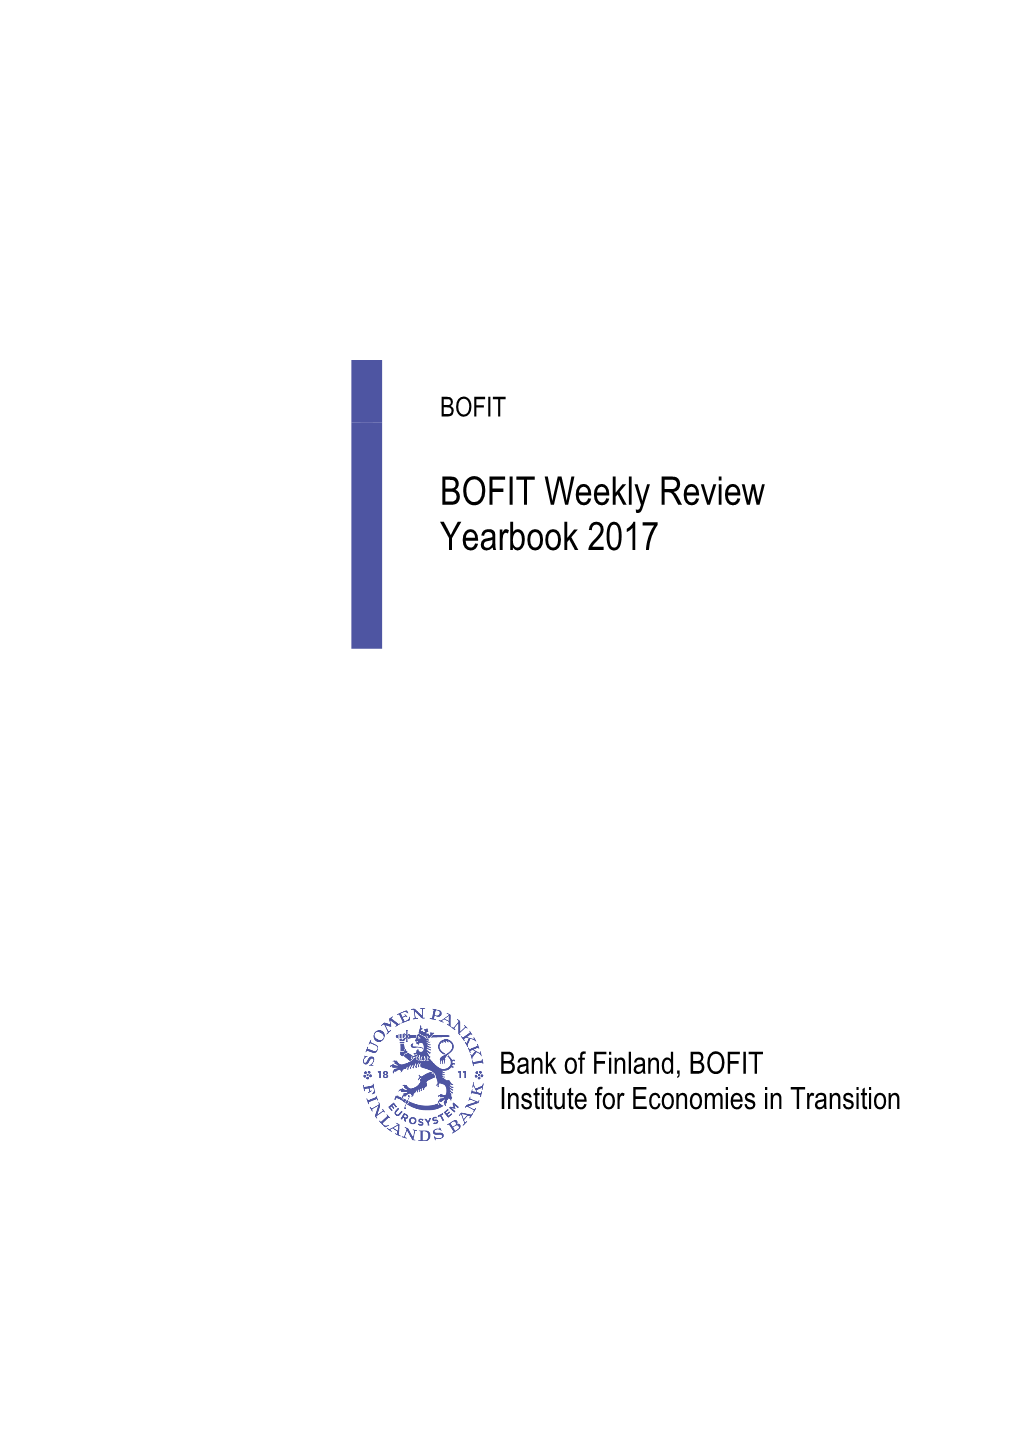 BOFIT Weekly Review Yearbook 2017